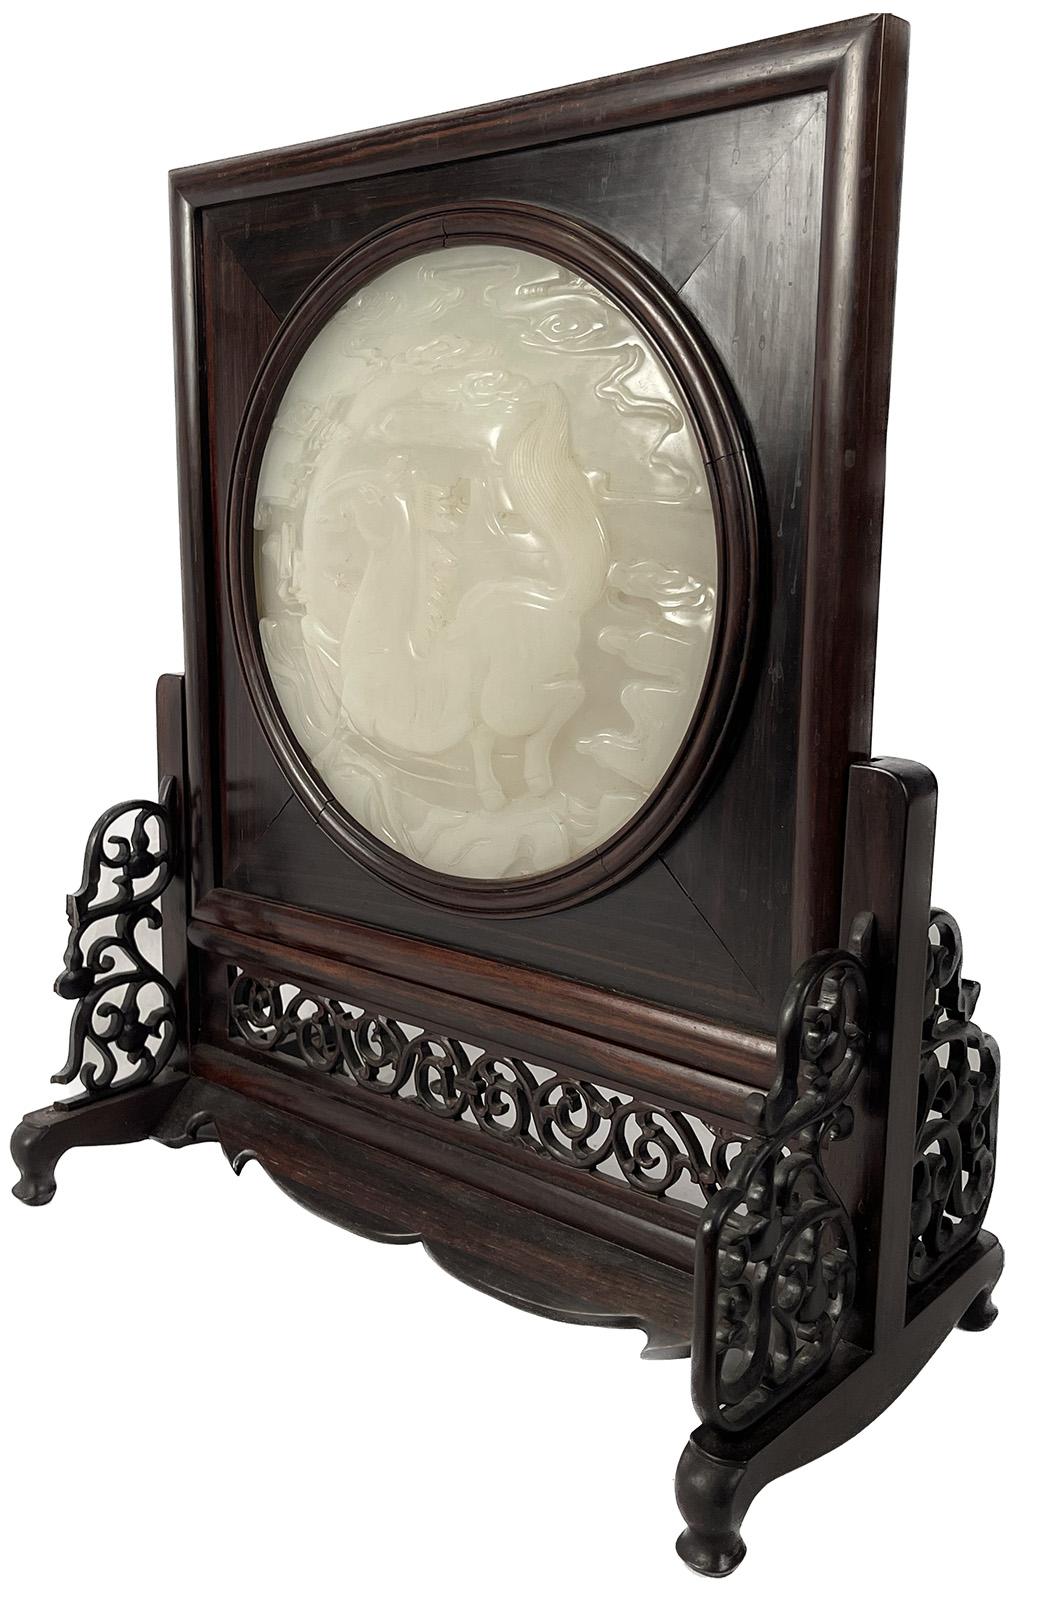 An early 20th century Chinese carved white jade table screen with a horse and clouds. 

Dimensions: 18.25